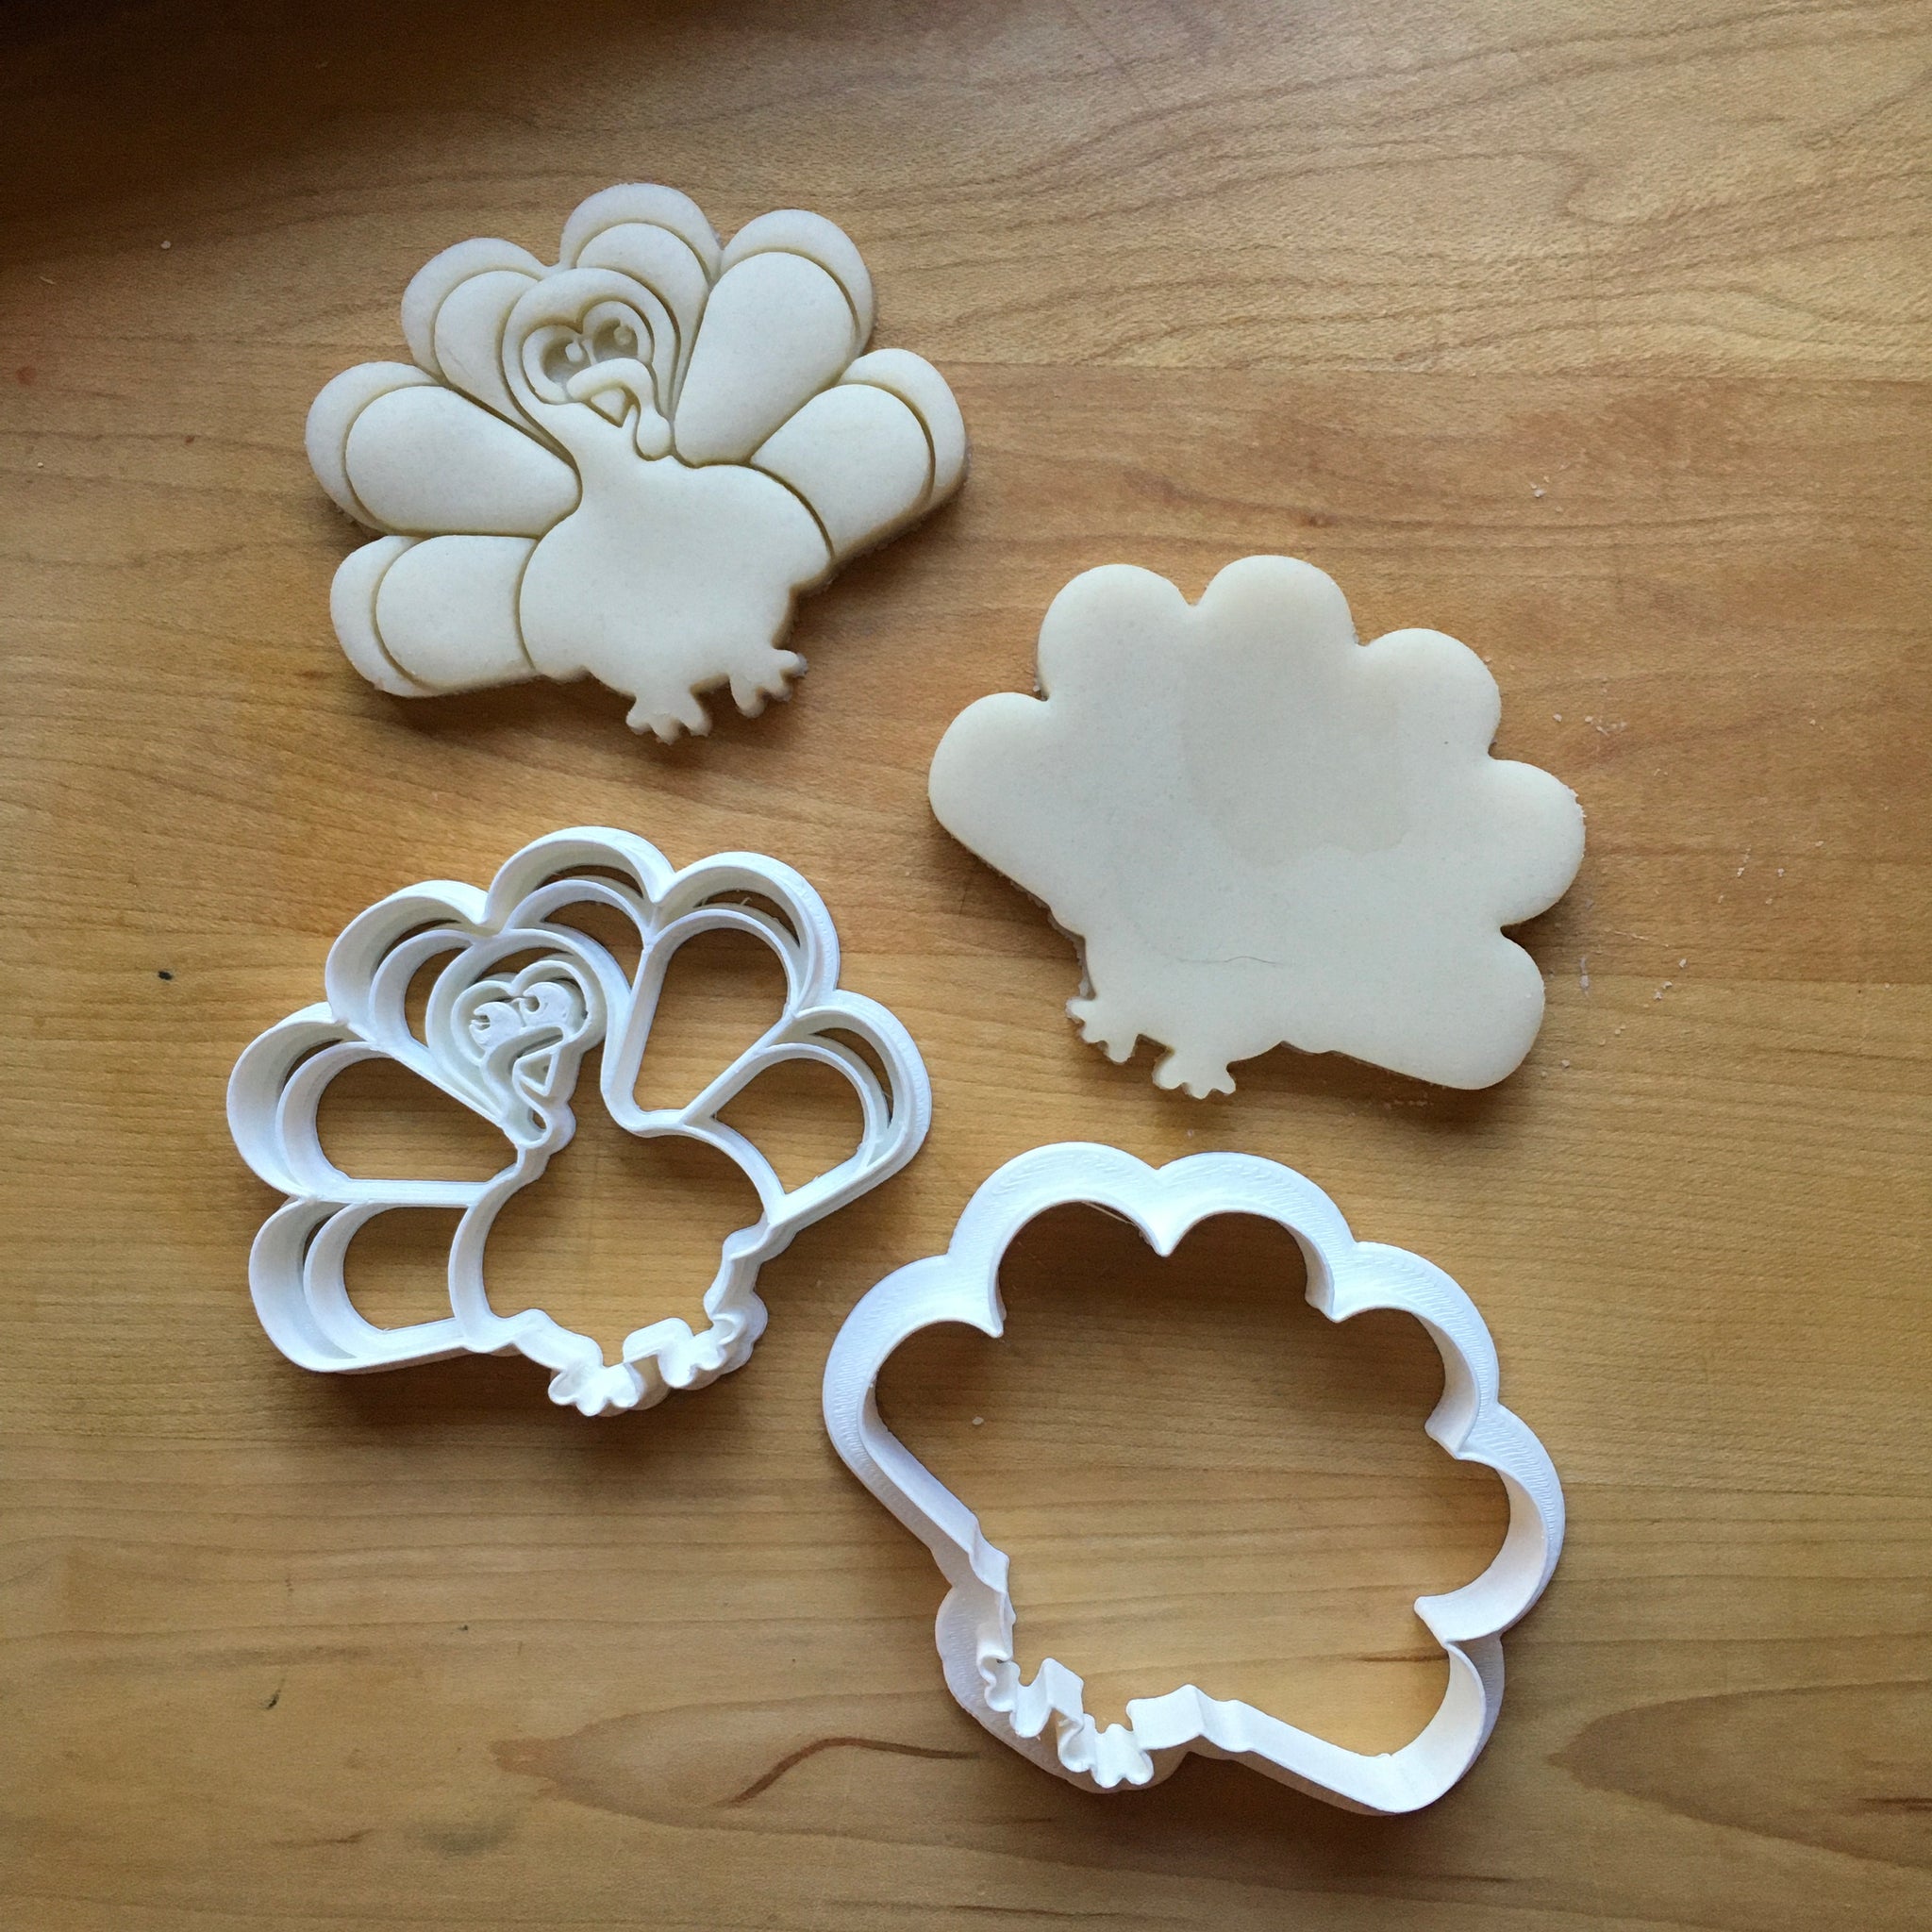 Large Cloud Cookie Cutter